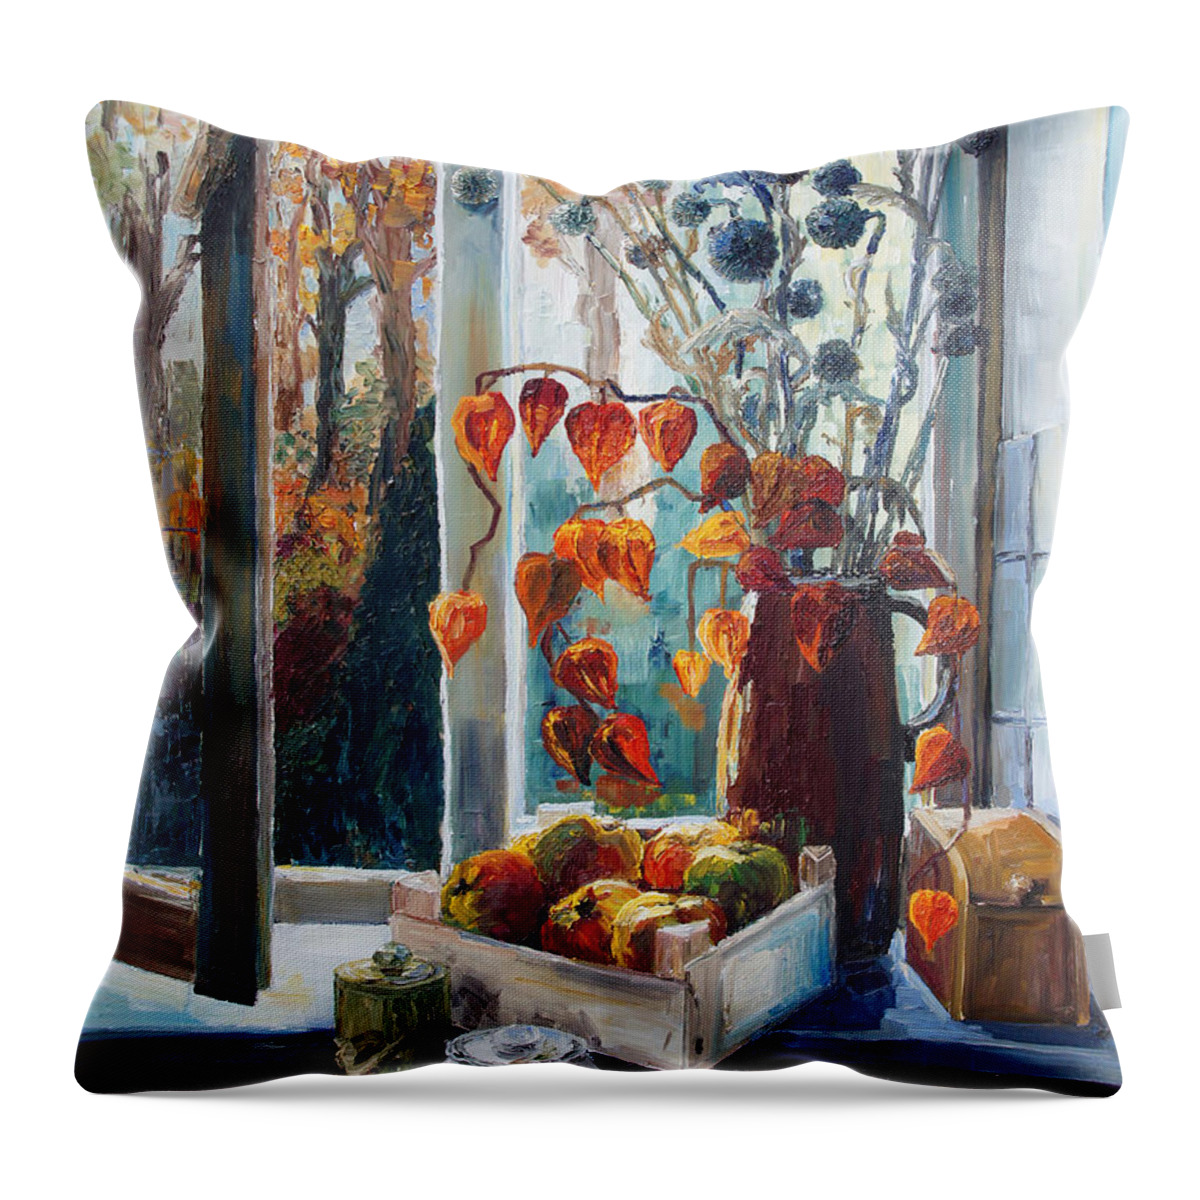 Still Life Throw Pillow featuring the painting Autumn At The Kitchen Window by Barbara Pommerenke